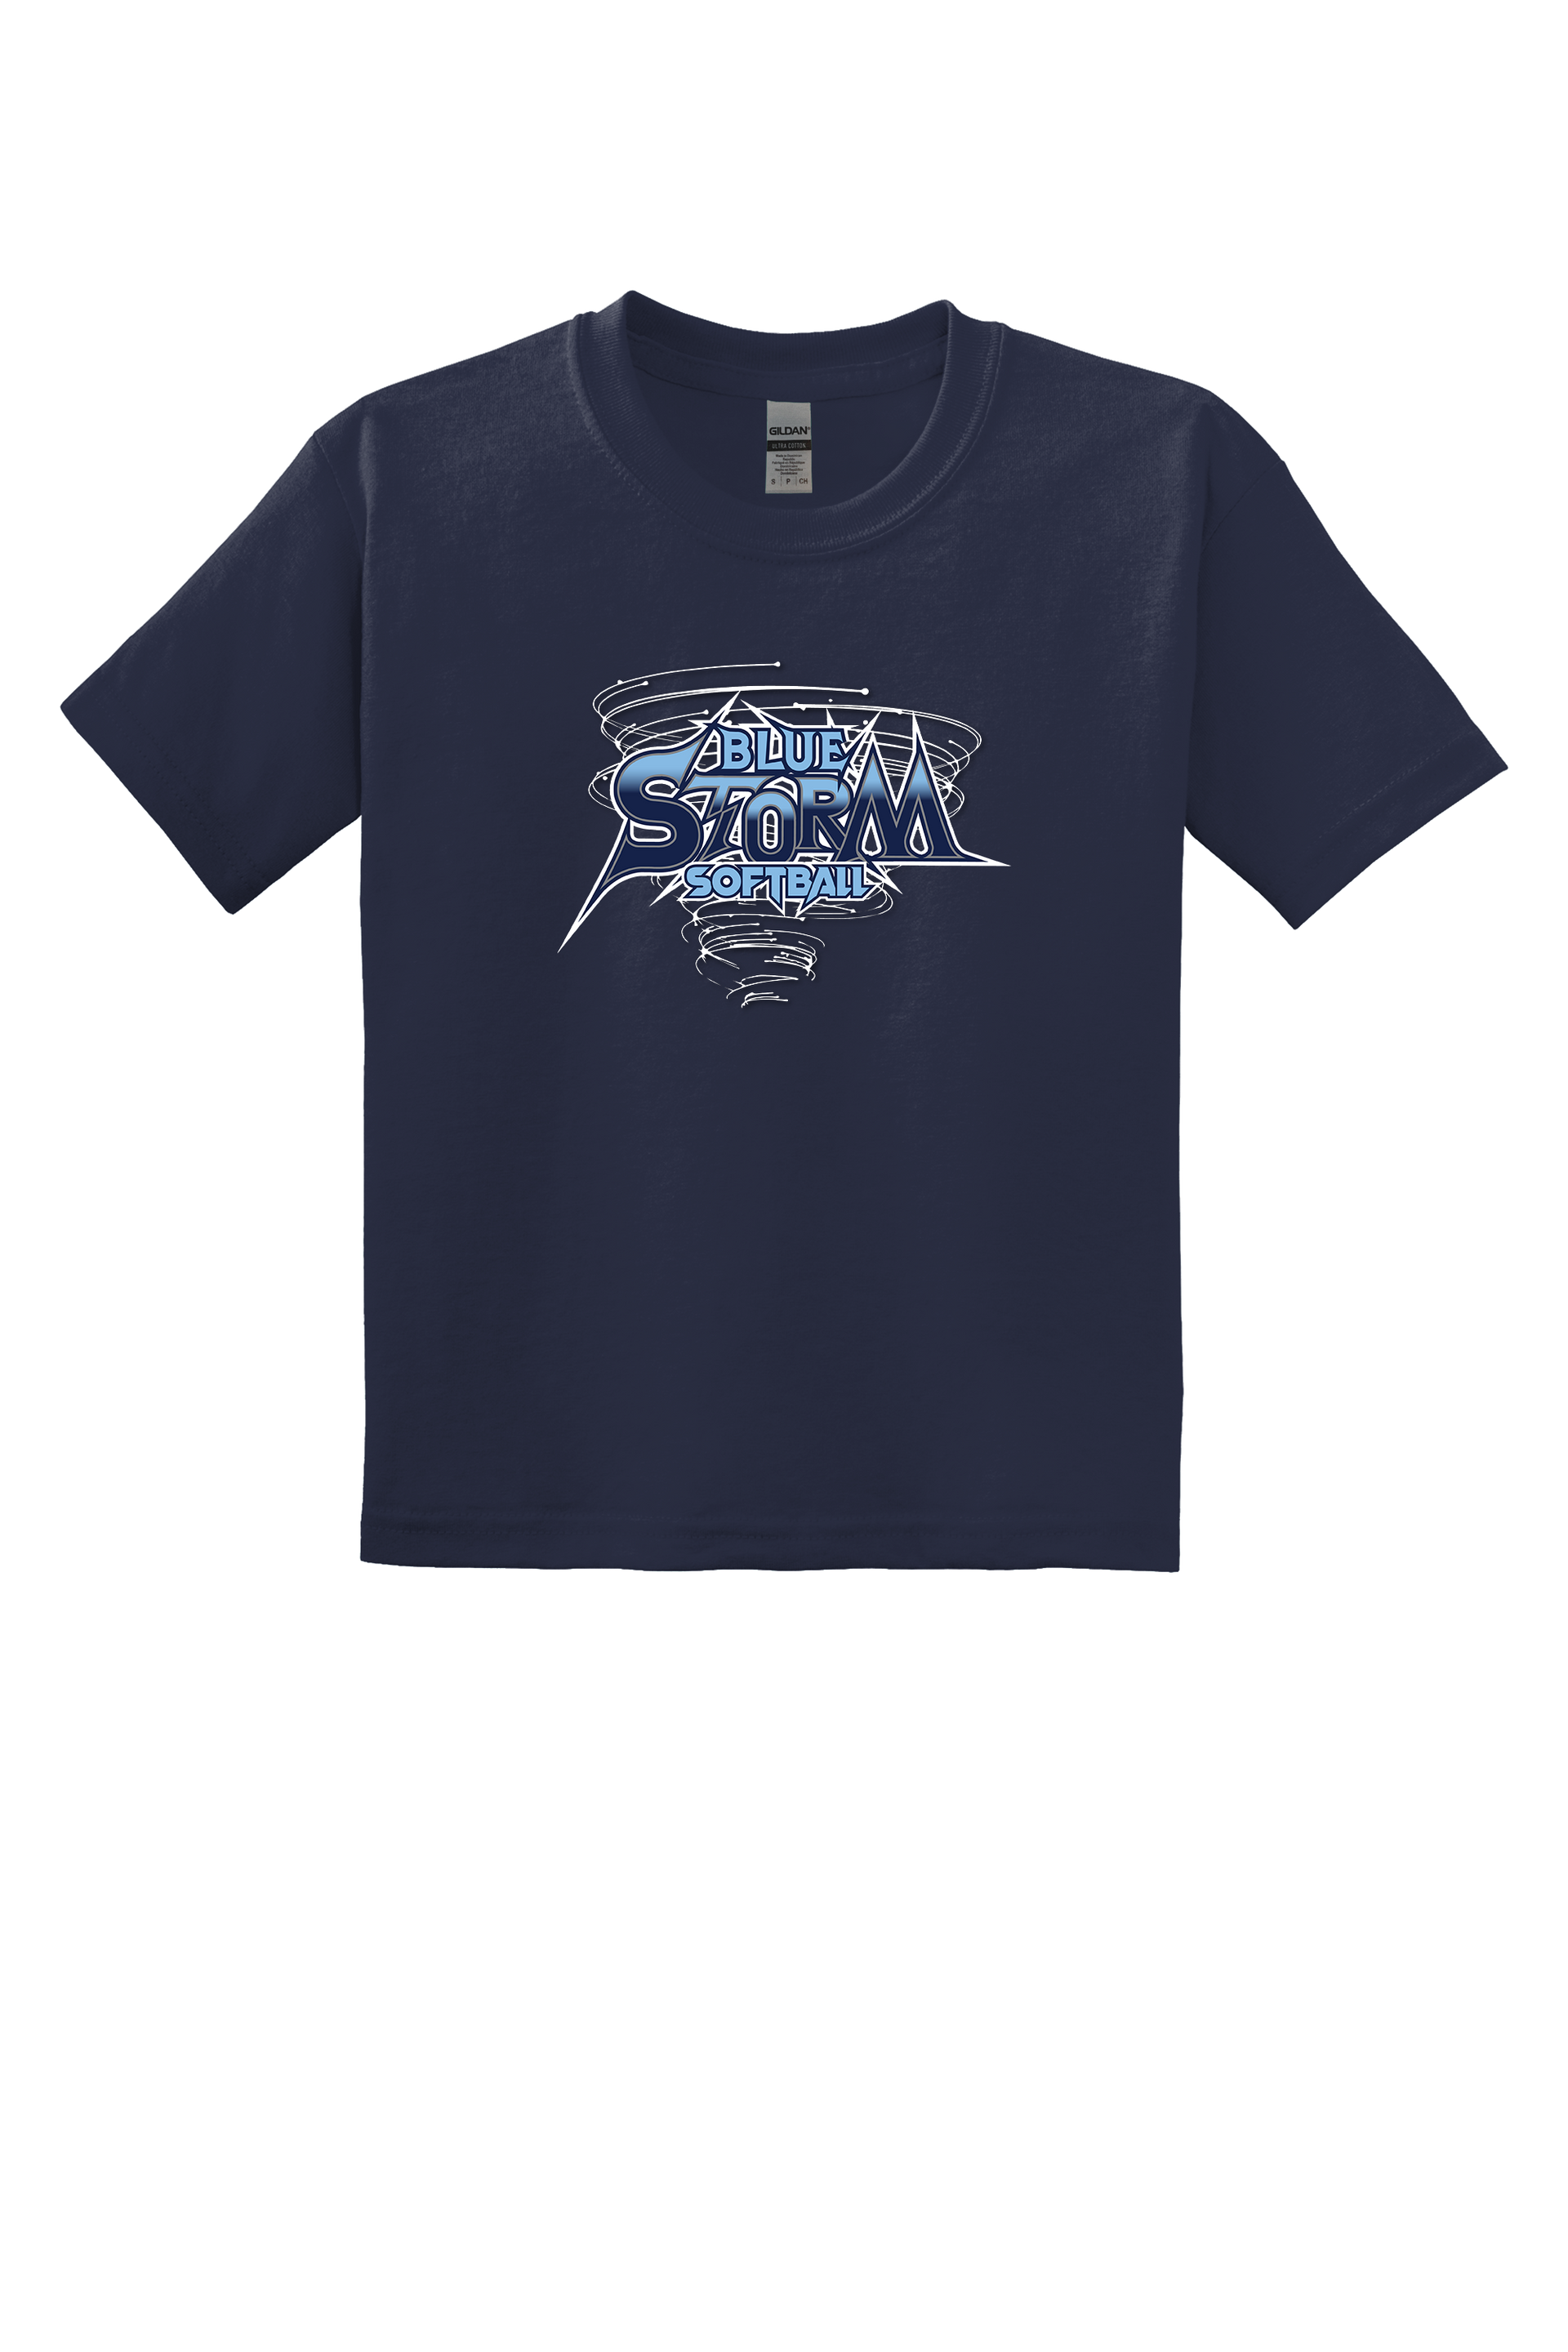 Blue Storm Delta Soft Youth Soft Spun Tee in Athletic Navy or Charcoal Heather | Blue Storm